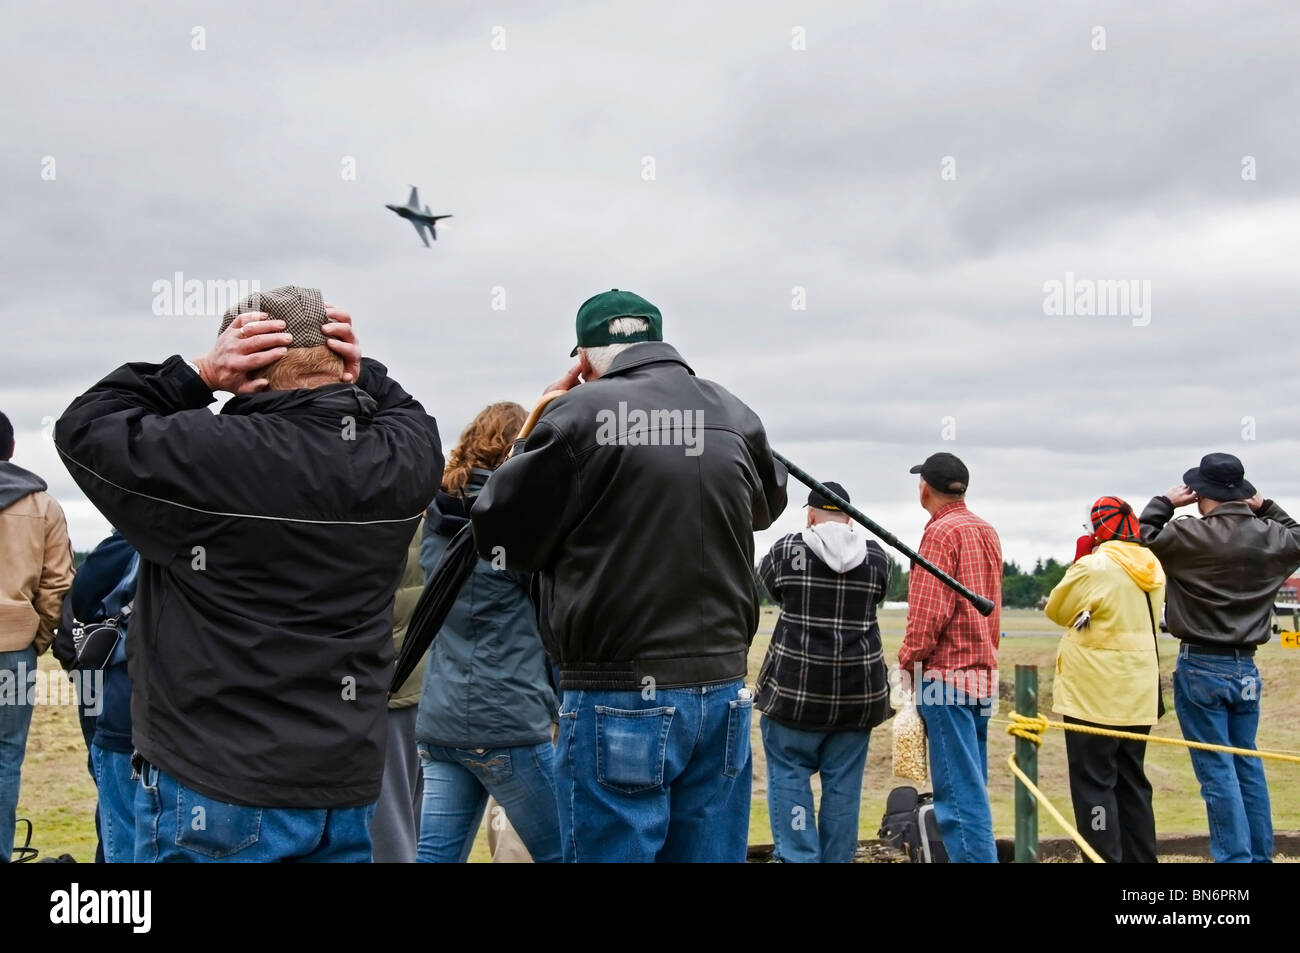 A group of people cover their ears and watch the fast approach and aerial stunt of an F-16 Fighting Falcon at an airshow. Stock Photo